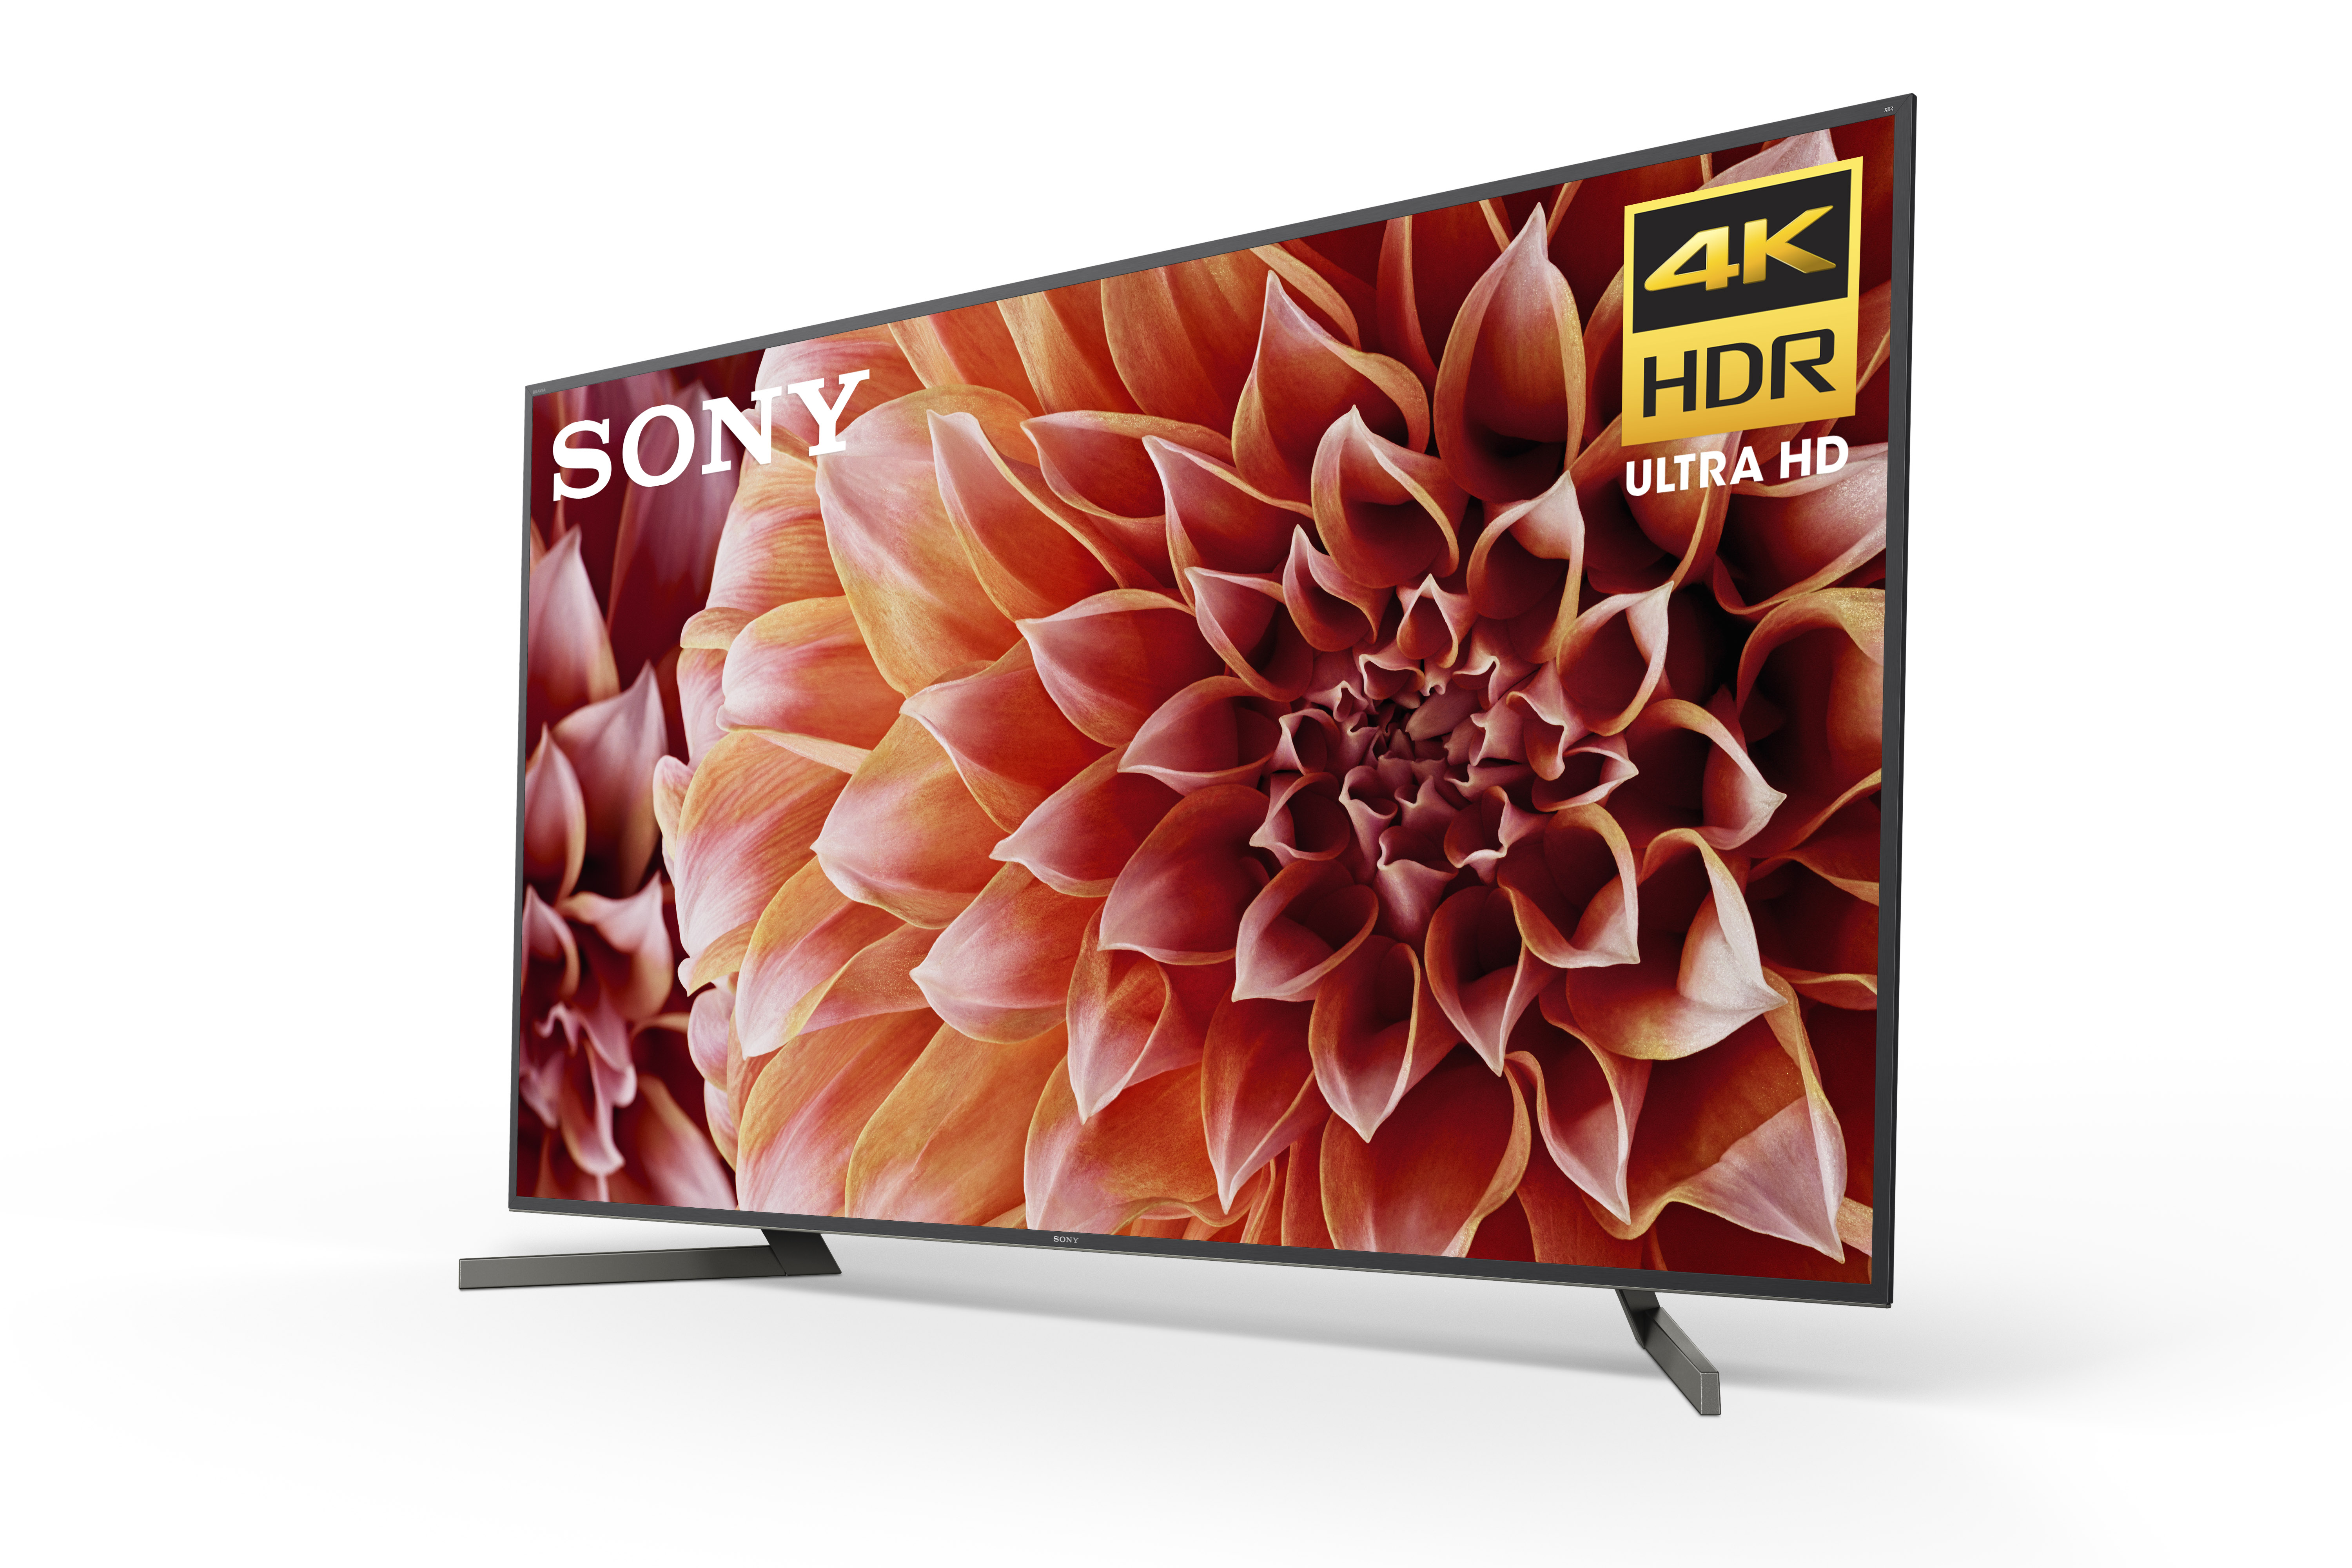 Sony 65" Class 4K UHD LED Android Smart TV HDR BRAVIA 900F Series XBR65X900F - image 5 of 21